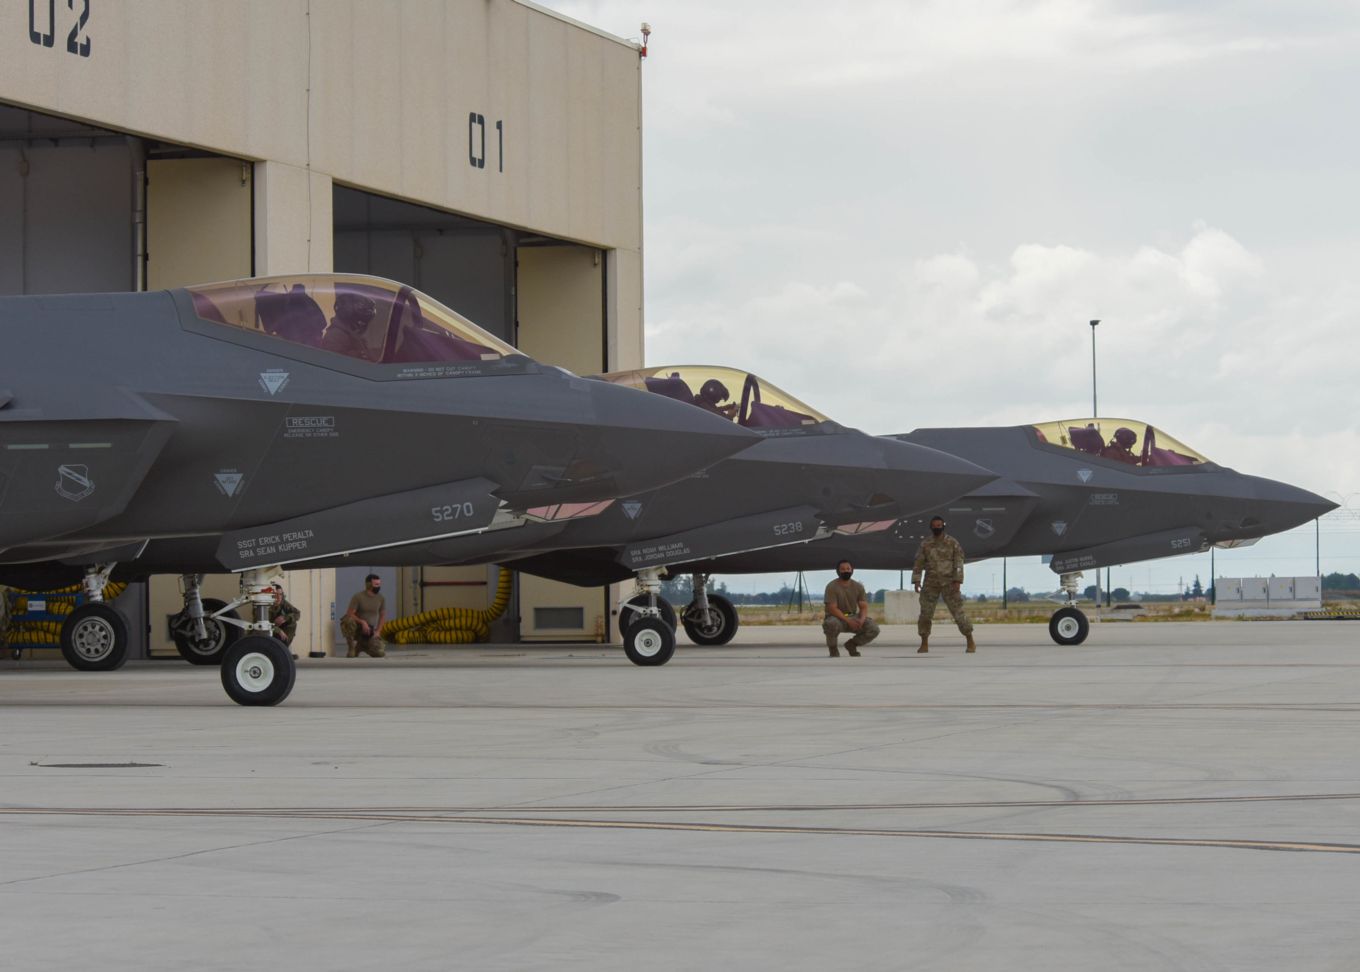 Three F-35B Lightnings on the ground with personnel and pilot.